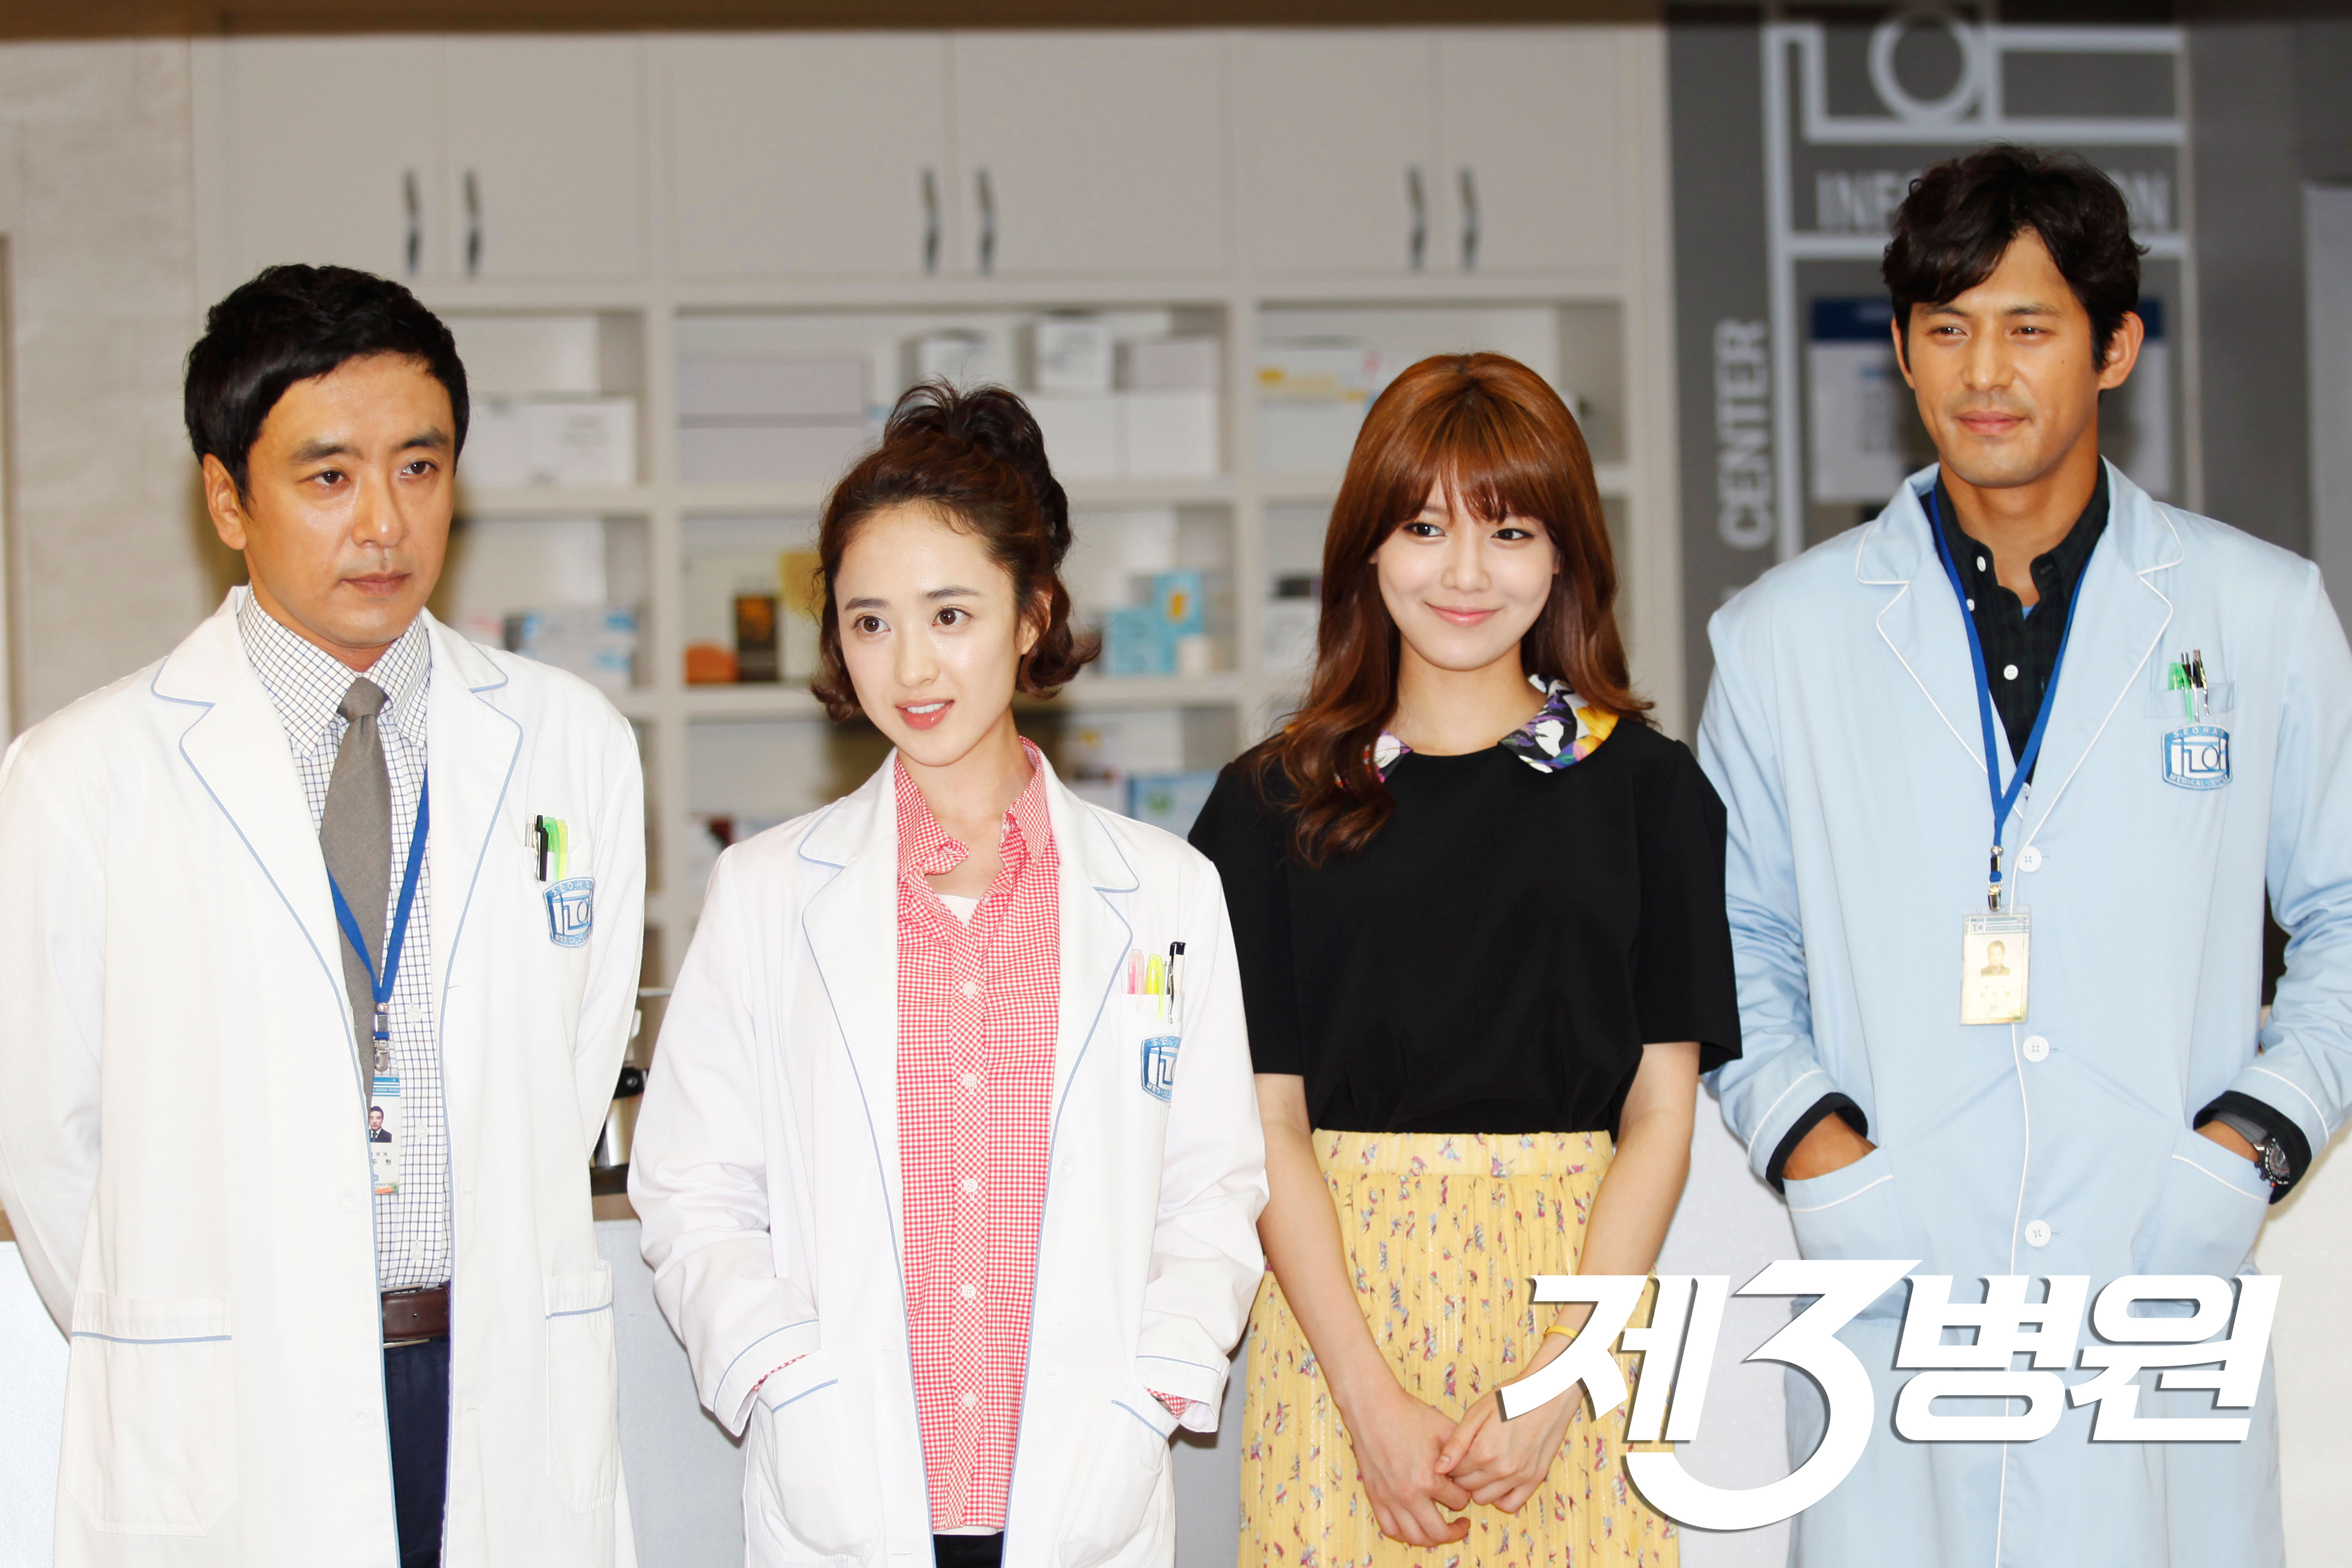 Sooyoung & The 3rd Hospital co-stars